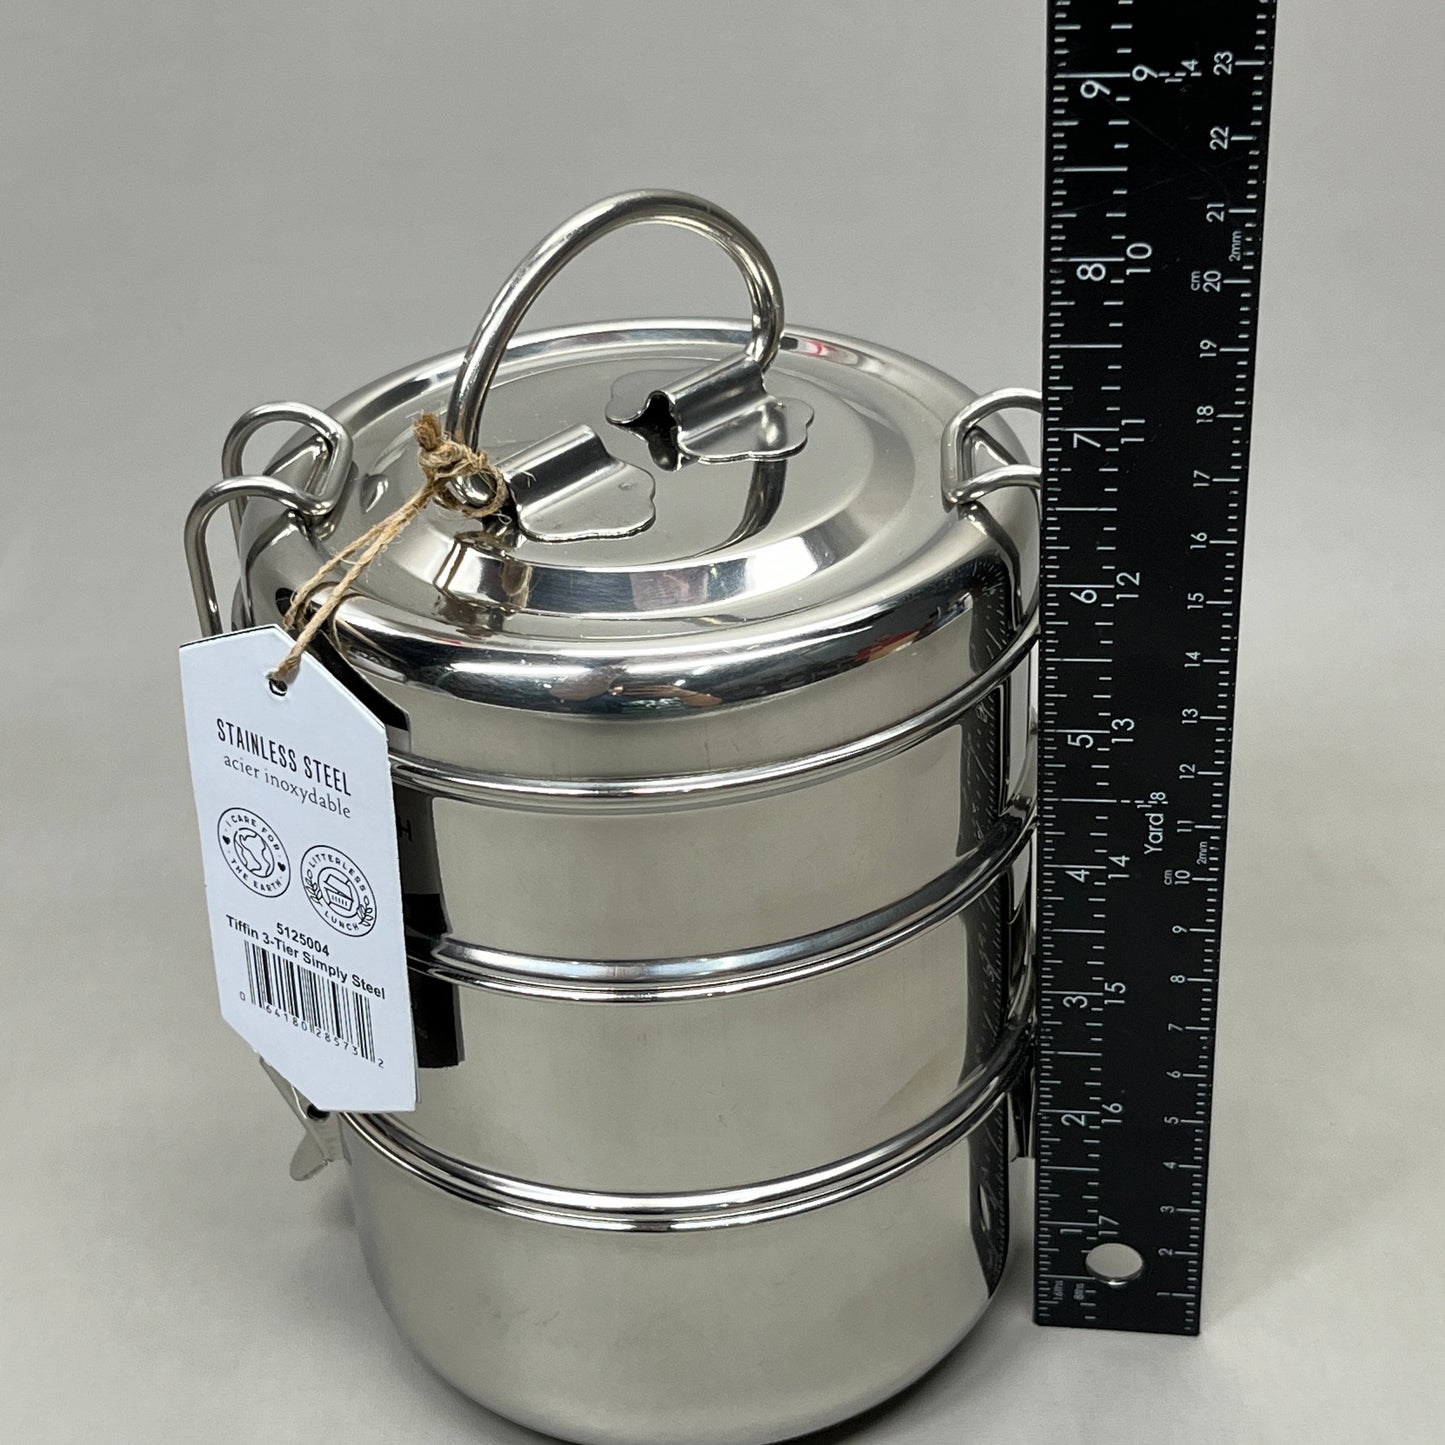 NOW DESIGNS Tiffin 3-Tier Simply Stainless Steel Food Container 7" x 6" 5125004 (New)